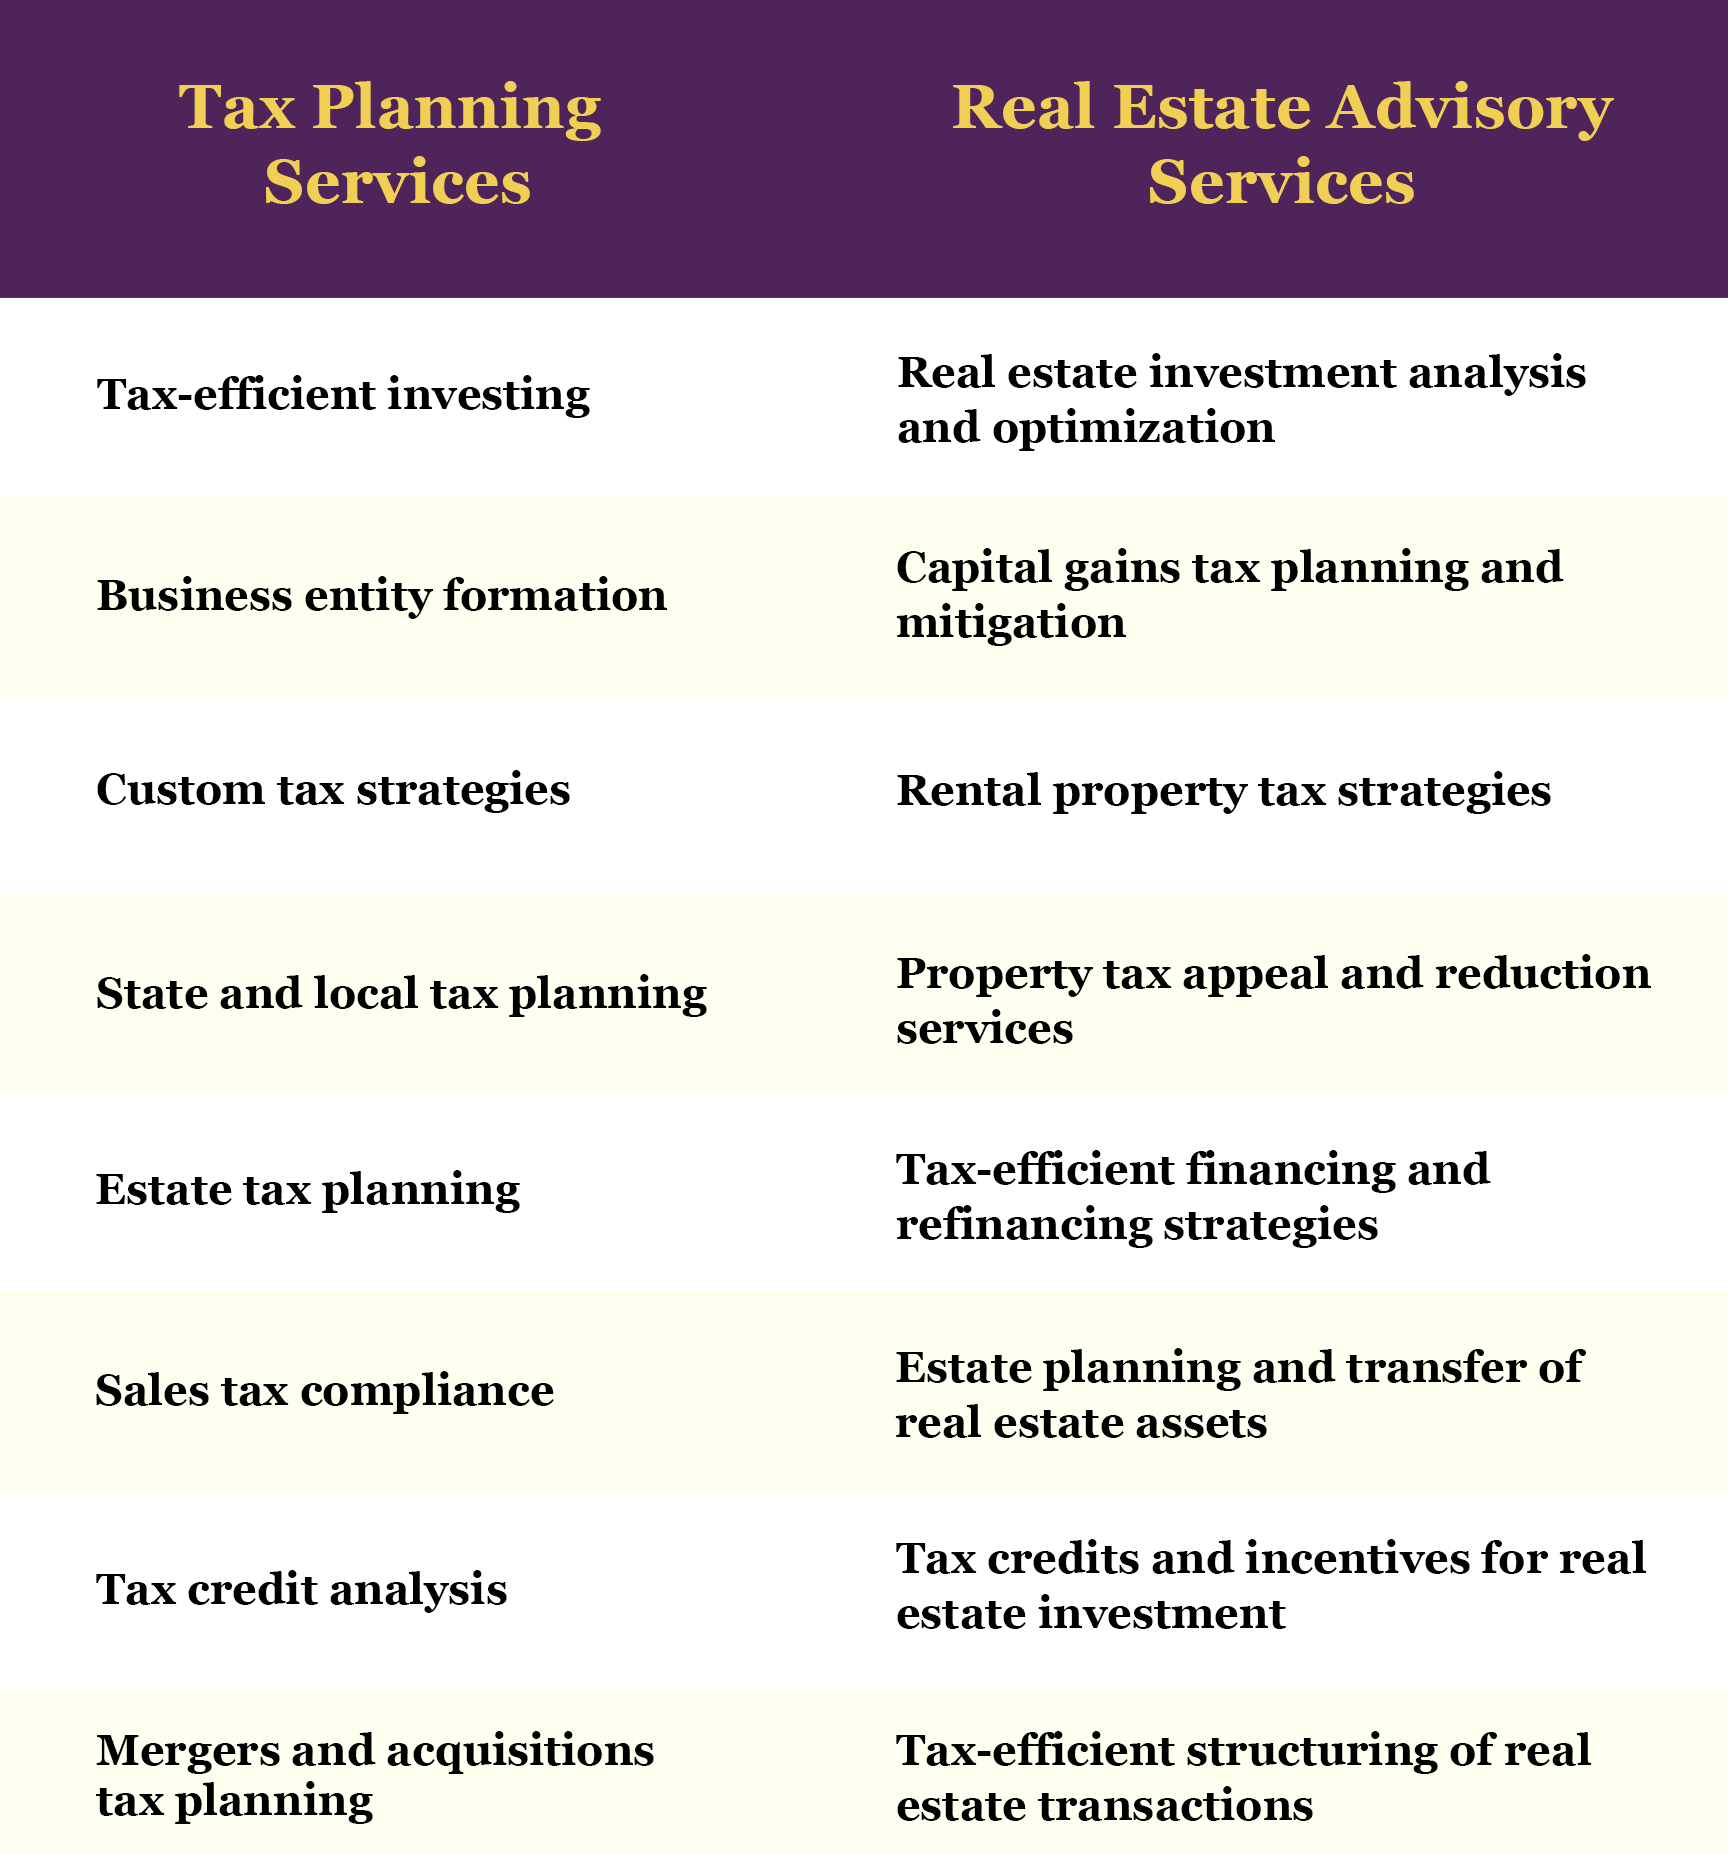 Expert Real Estate Tax Advisor with client